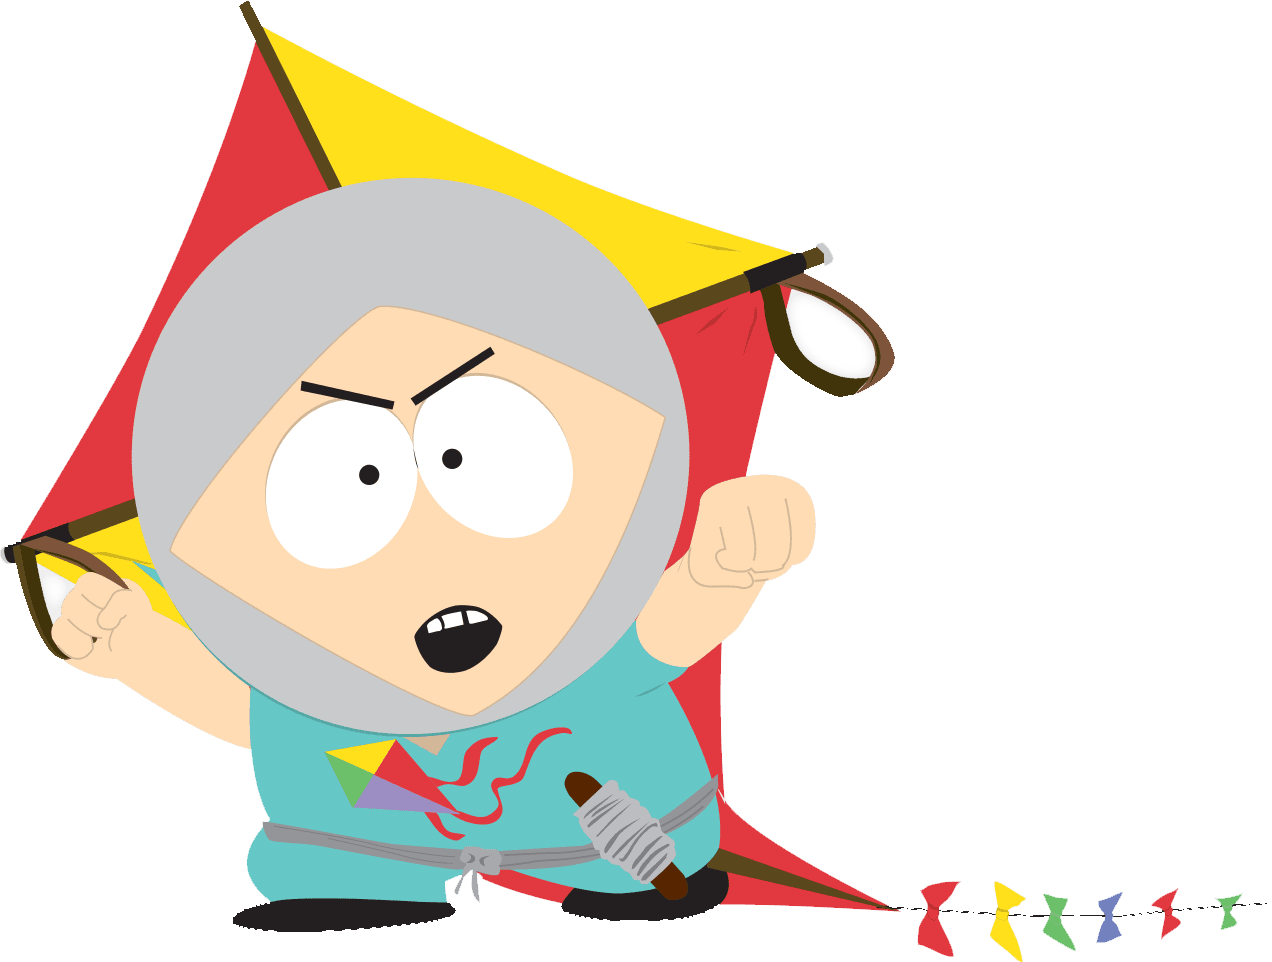 South Park The Fractured But Whole Human Kite (1272x962)